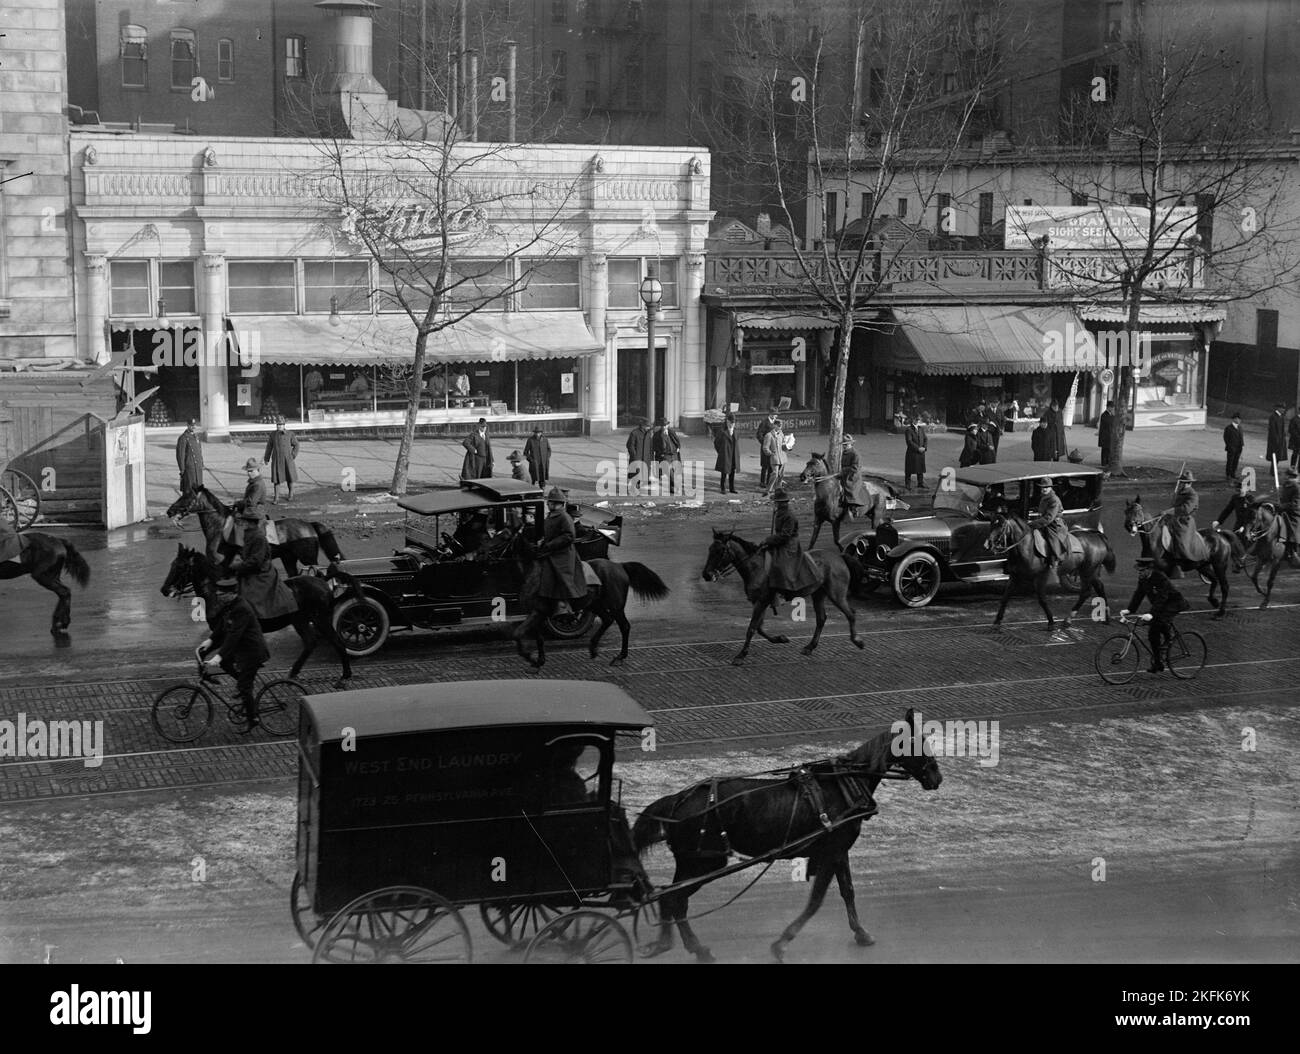 Childs Restaurant, Pennsylvania Avenue, Washington DC, 1917. First World War: bystanders watch military outriders escorting cortege of official cars. The rear car has US and German flags. Johann Heinrich von Bernstorff, German ambassador to the United States, left the US on 3 February 1917, after President Woodrow Wilson severed diplomatic relations with Germany. Childs Restaurants was one of the first national dining chains in the US and Canada. On the right are Pressler Bros. Haberdashers, and the offices of Gray Line Sightseeing Tours. Stock Photo